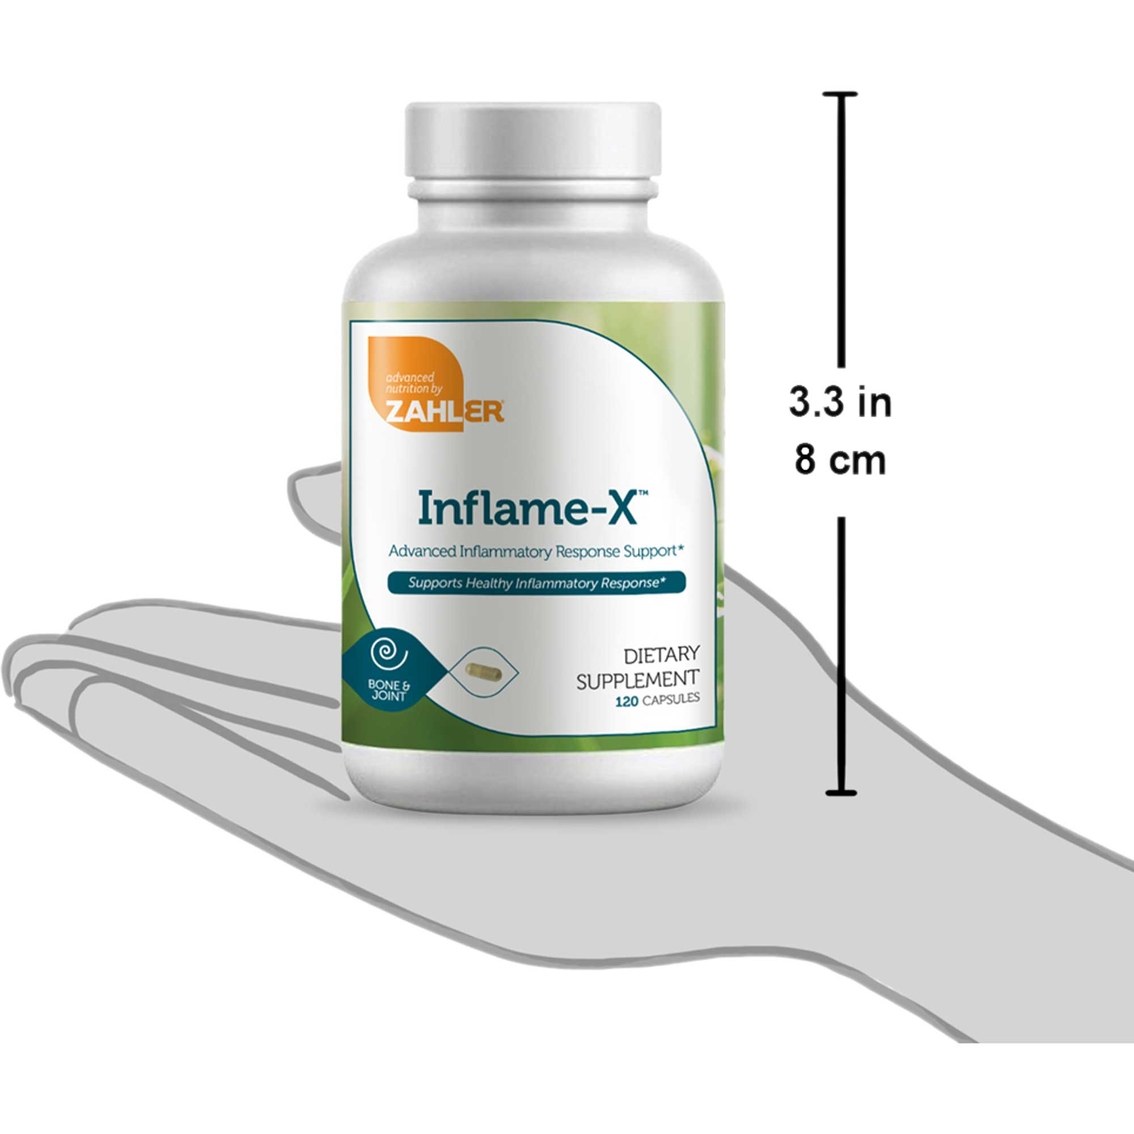 Zahler Inflame X Anti Inflammatory Supplement Certified Kosher Capsules 120 ct. - Image 4 of 5